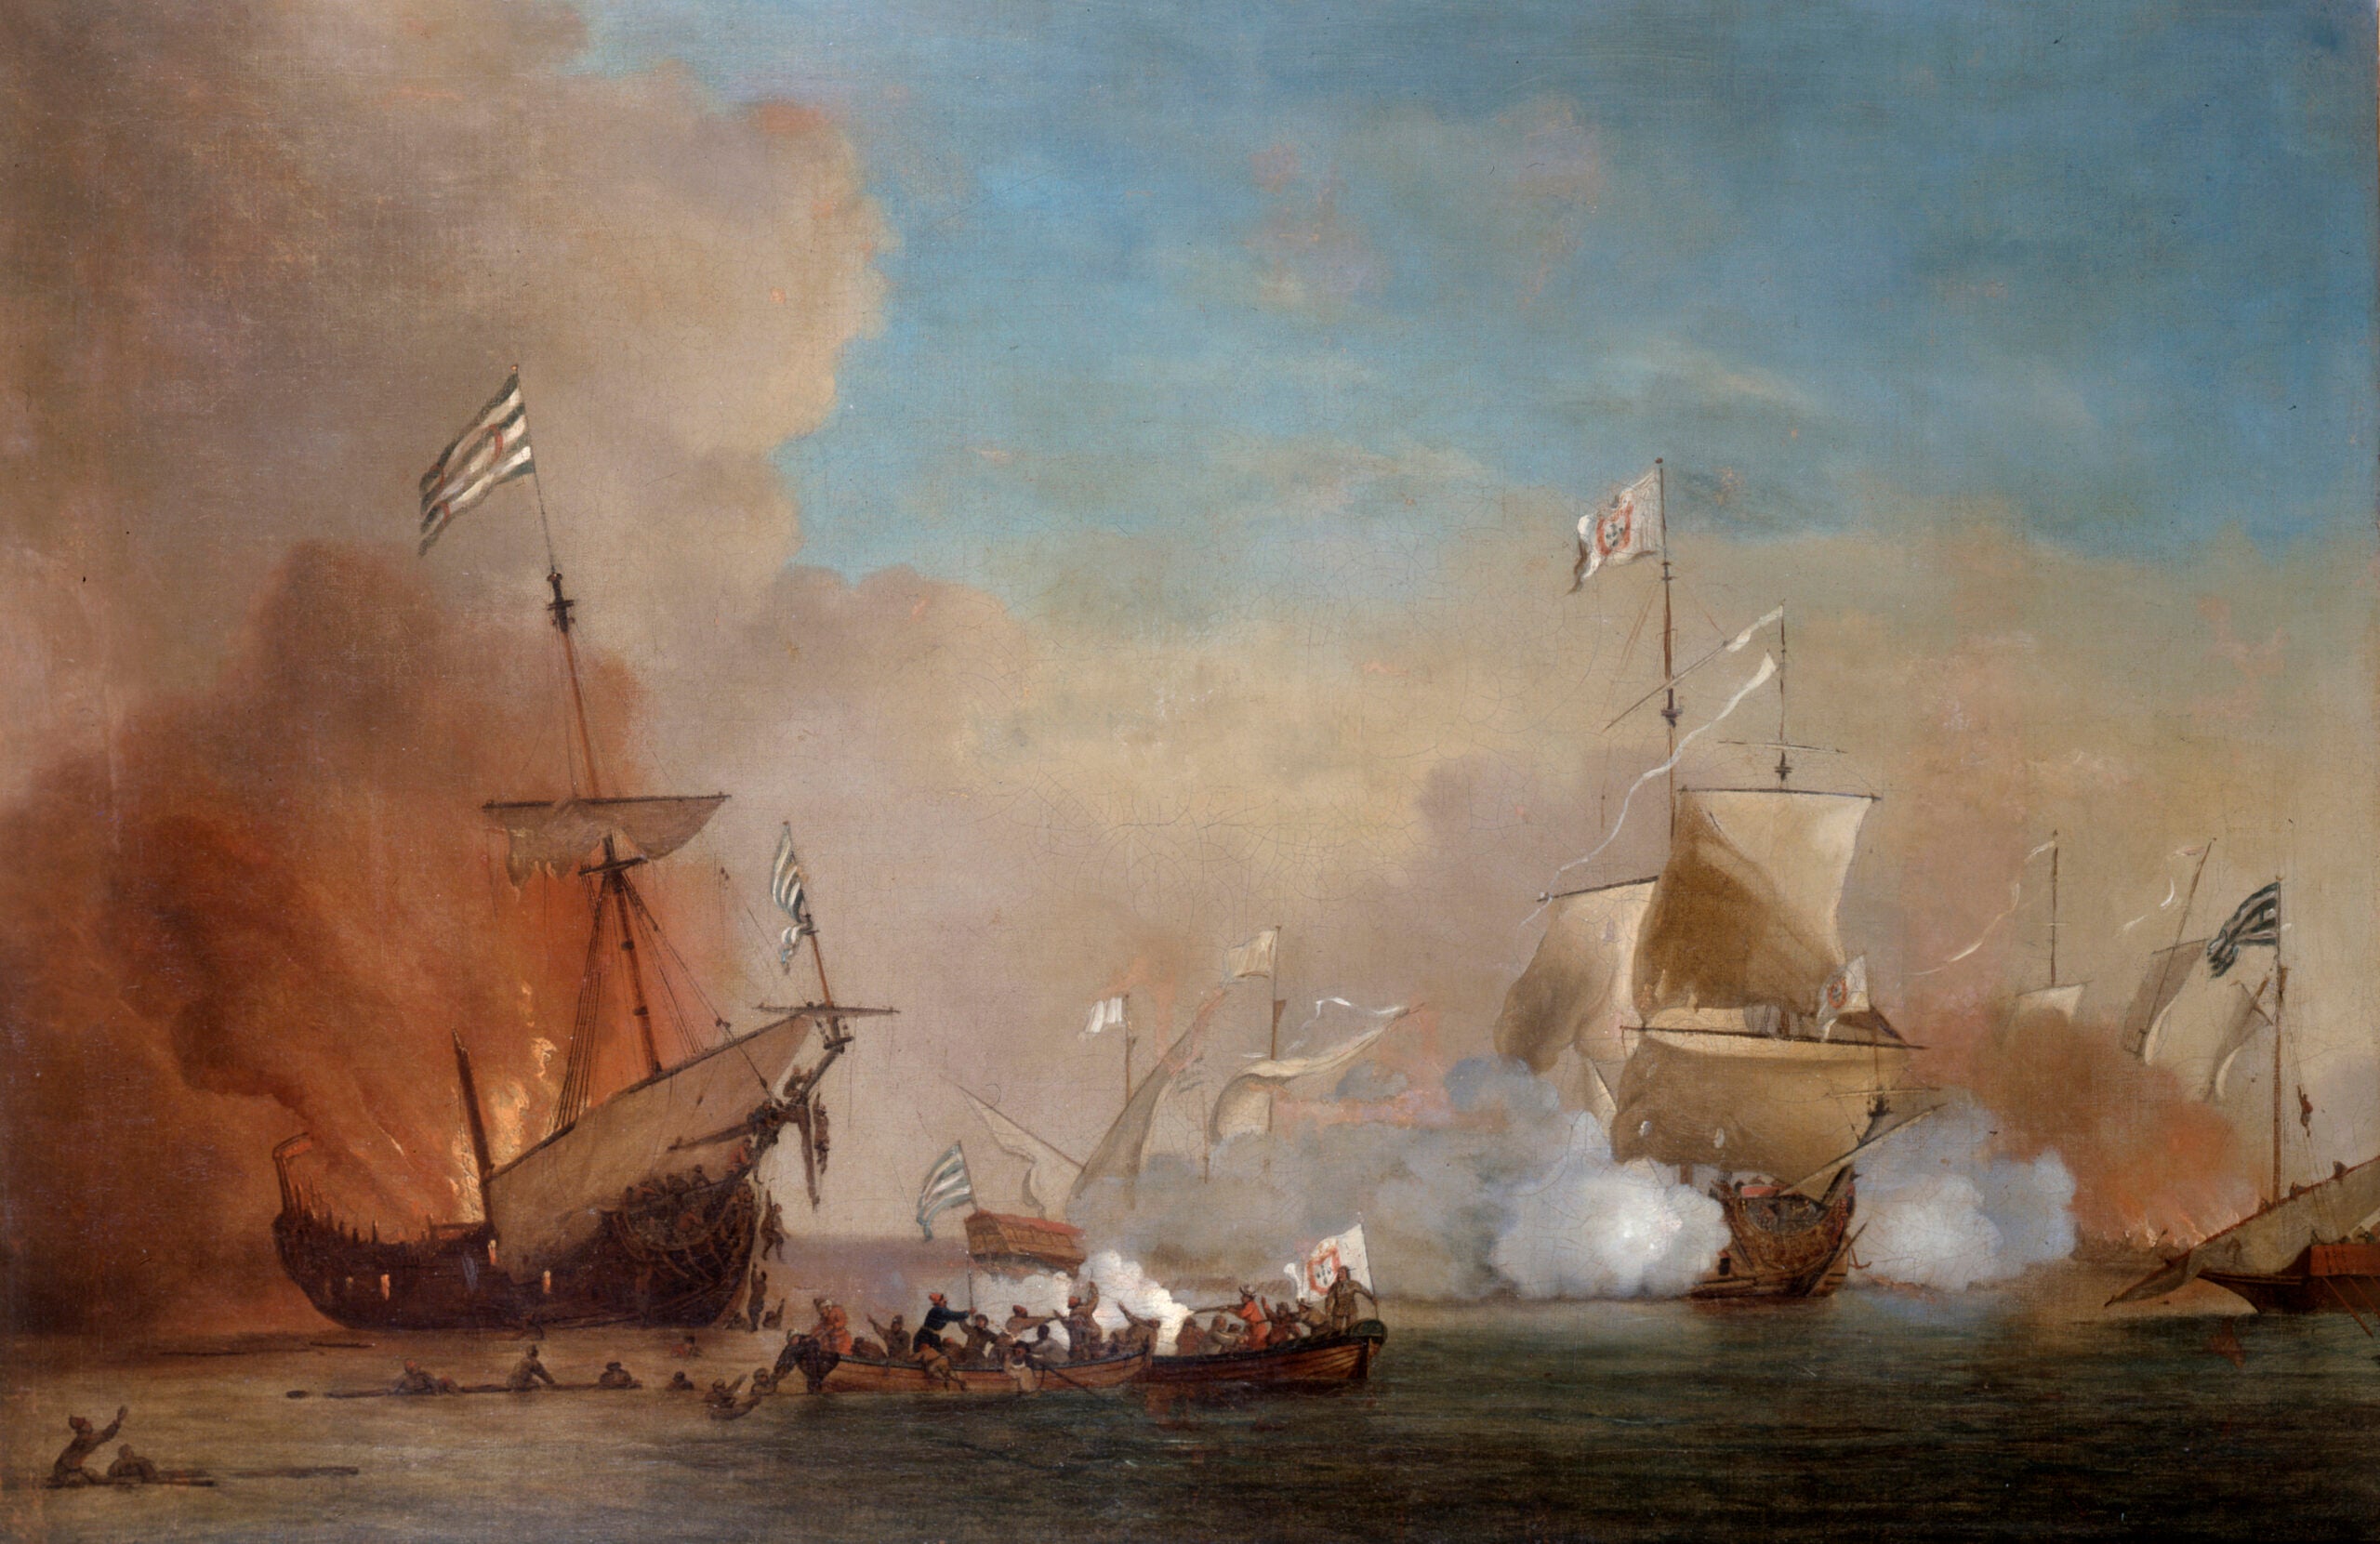 'Pirates Attacking a British Navy Ship', 17th century. (Photo by Art Media/Print Collector/Getty Images)